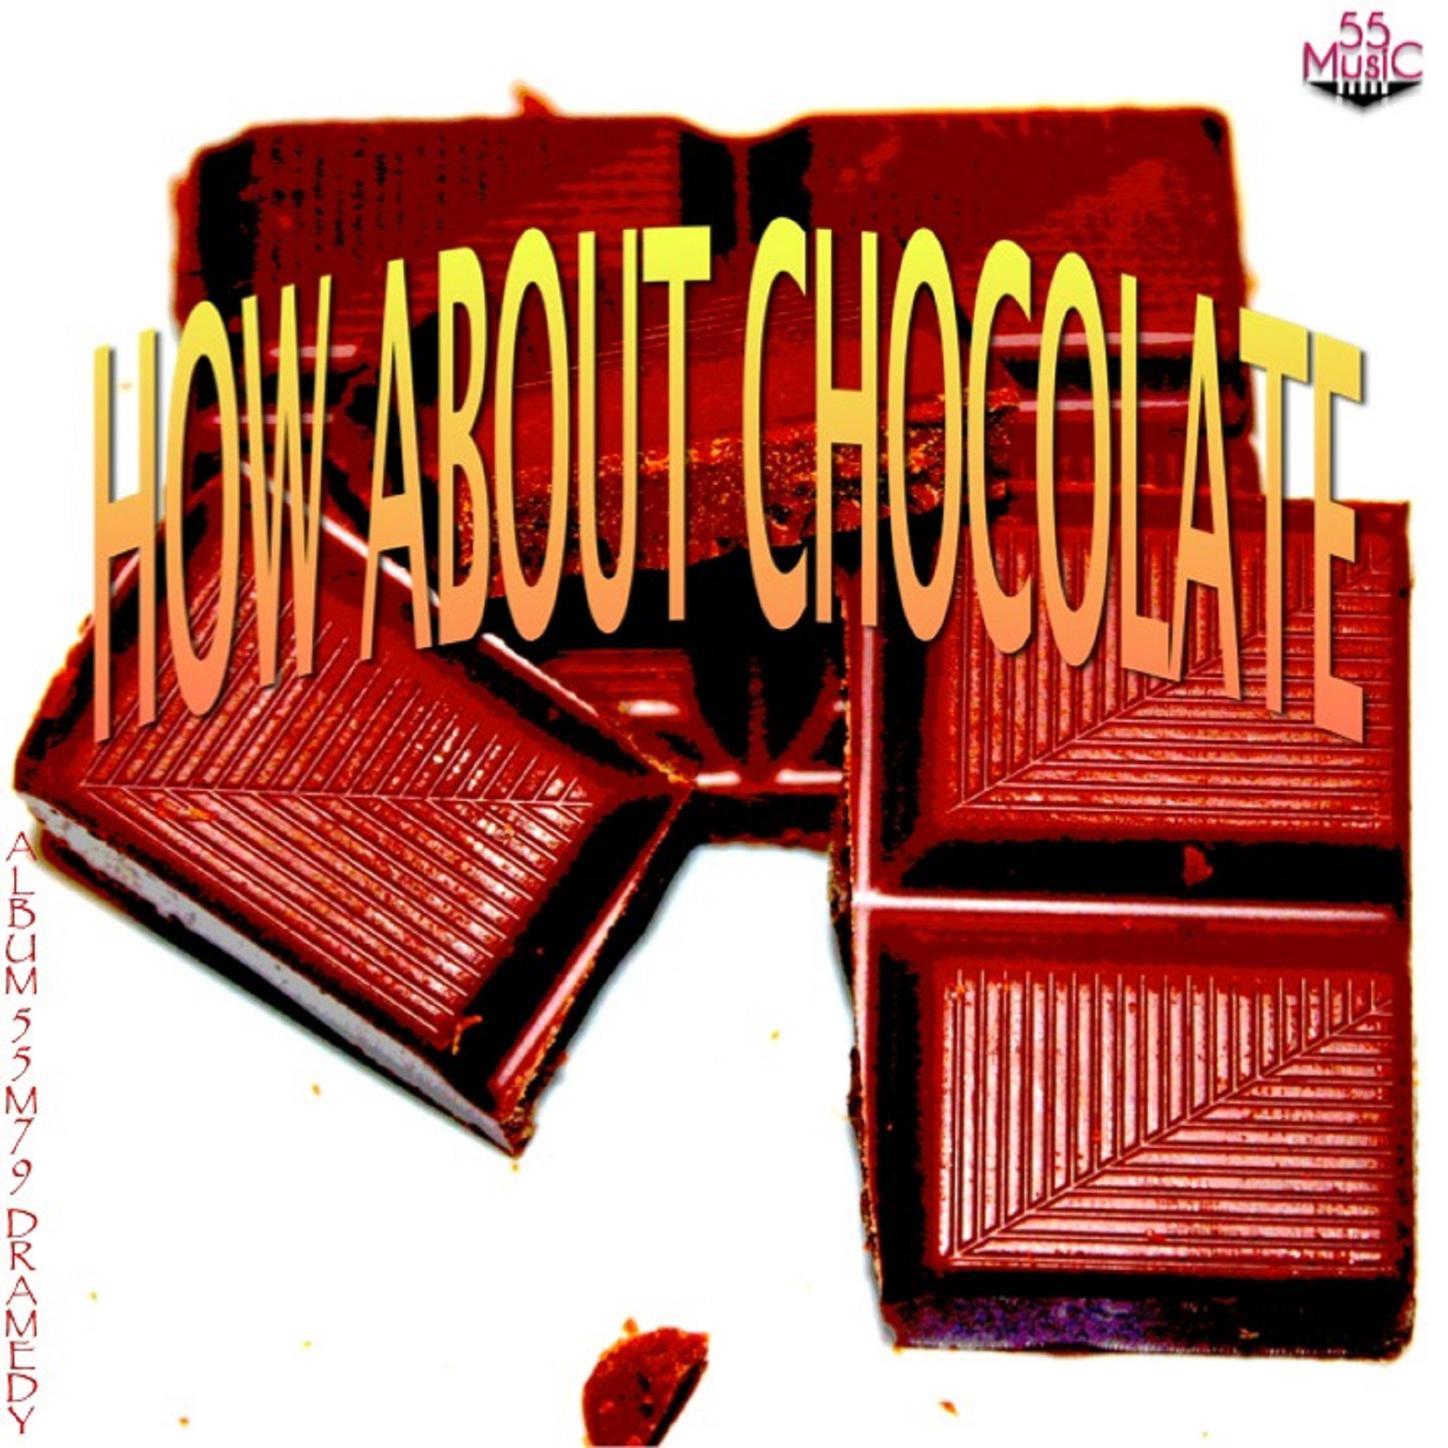 How About Chocolate